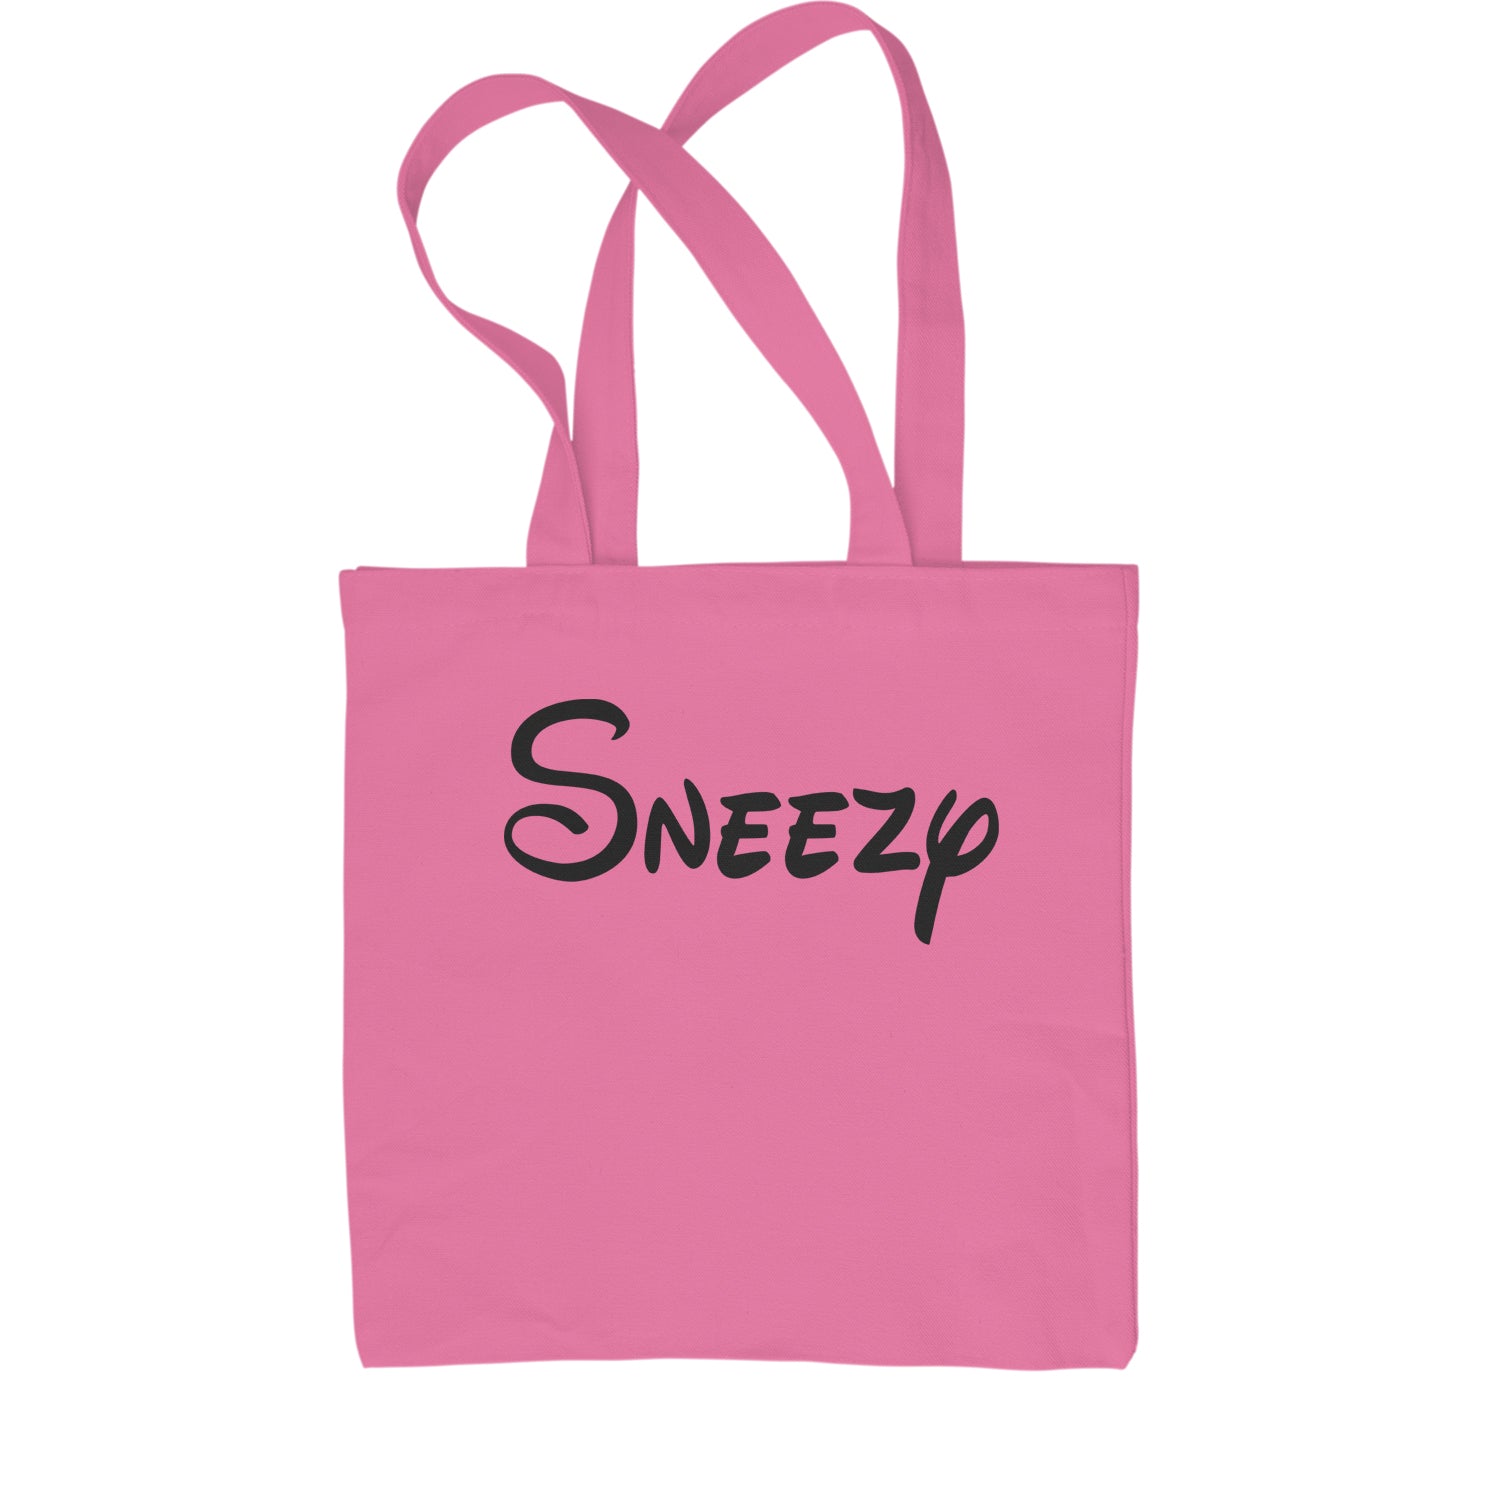 Sneezy - 7 Dwarfs Costume Shopping Tote Bag and, costume, dwarfs, group, halloween, matching, seven, snow, the, white by Expression Tees